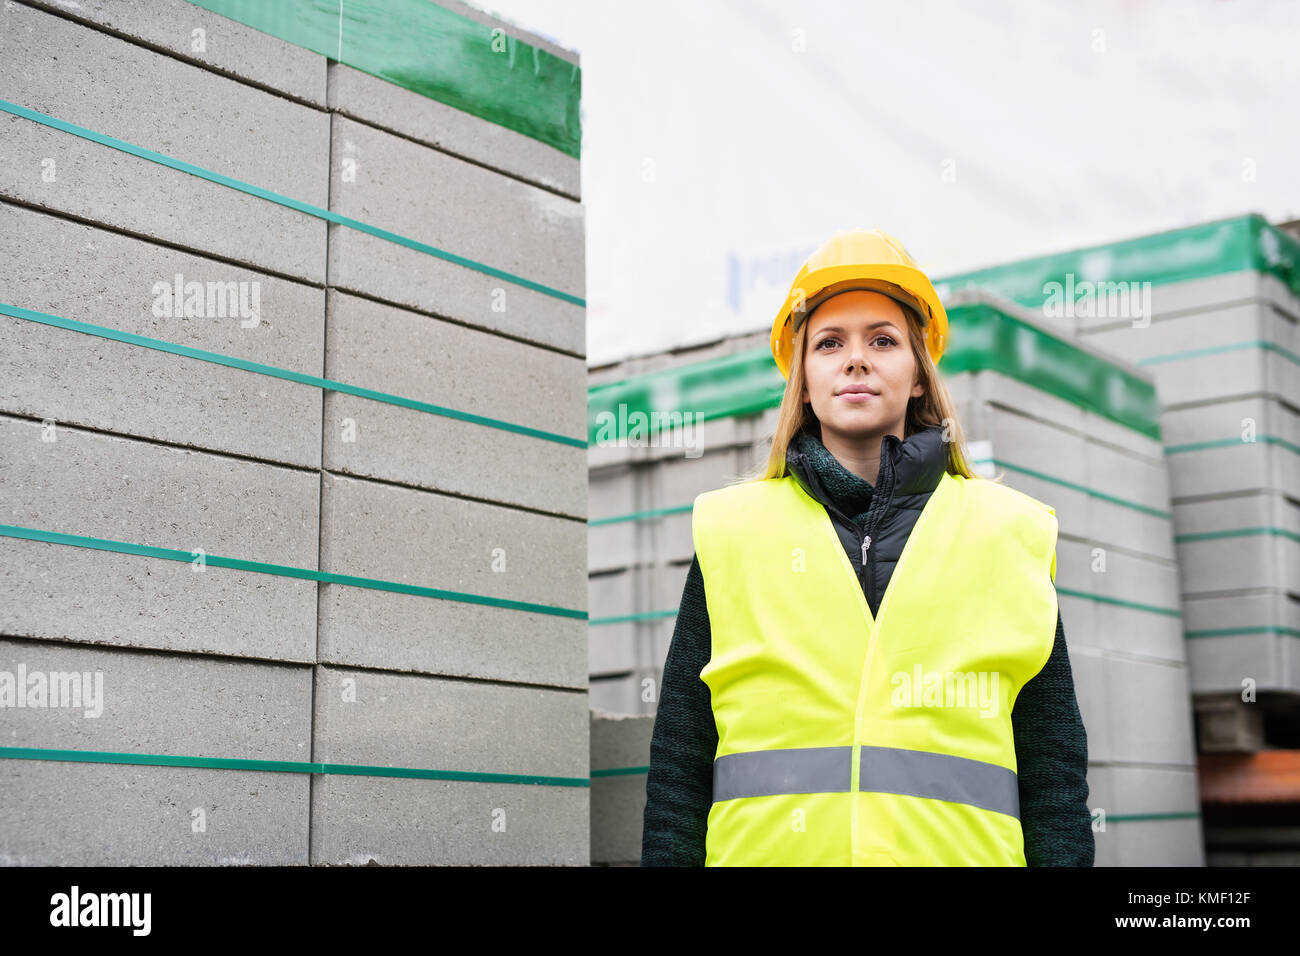 Woman worker standing in an industrial area. Stock Photo